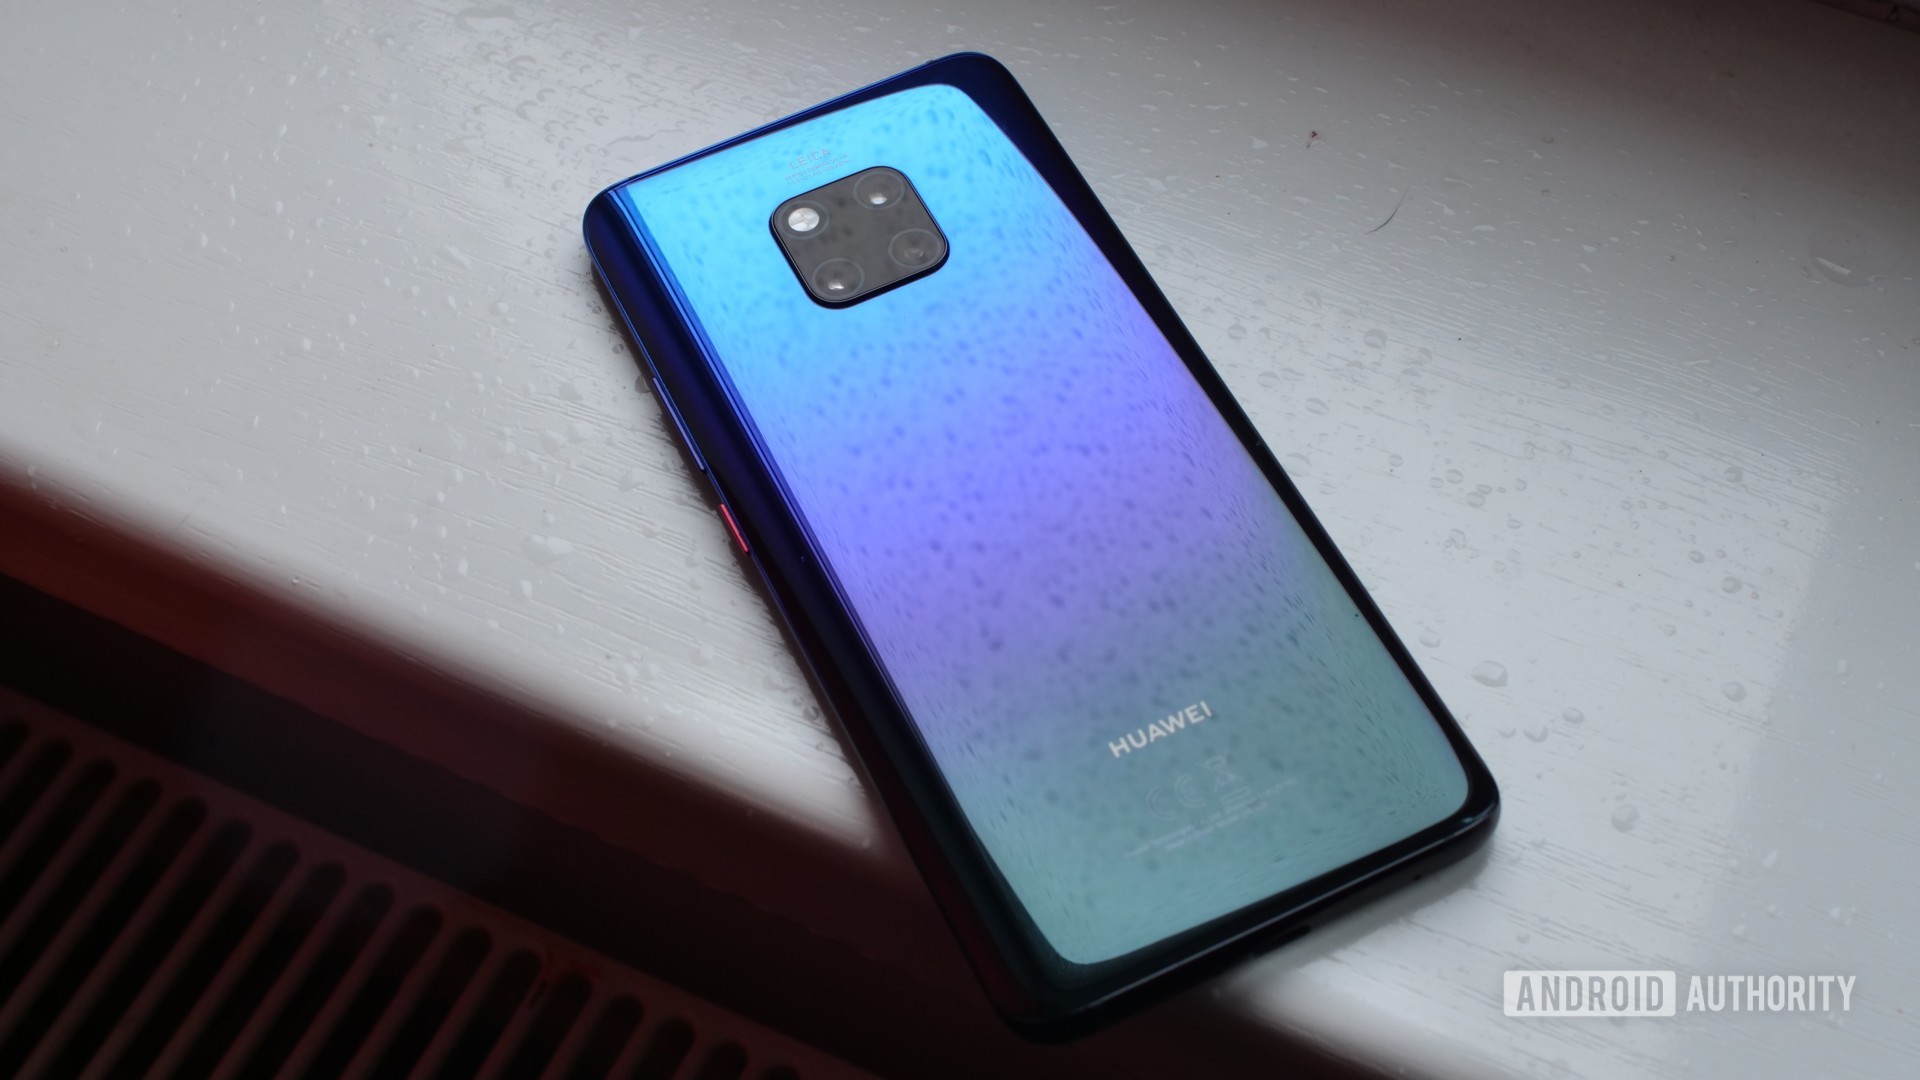 The HUAWEI Mate 30 series will pick up where the Mate 20 left off.